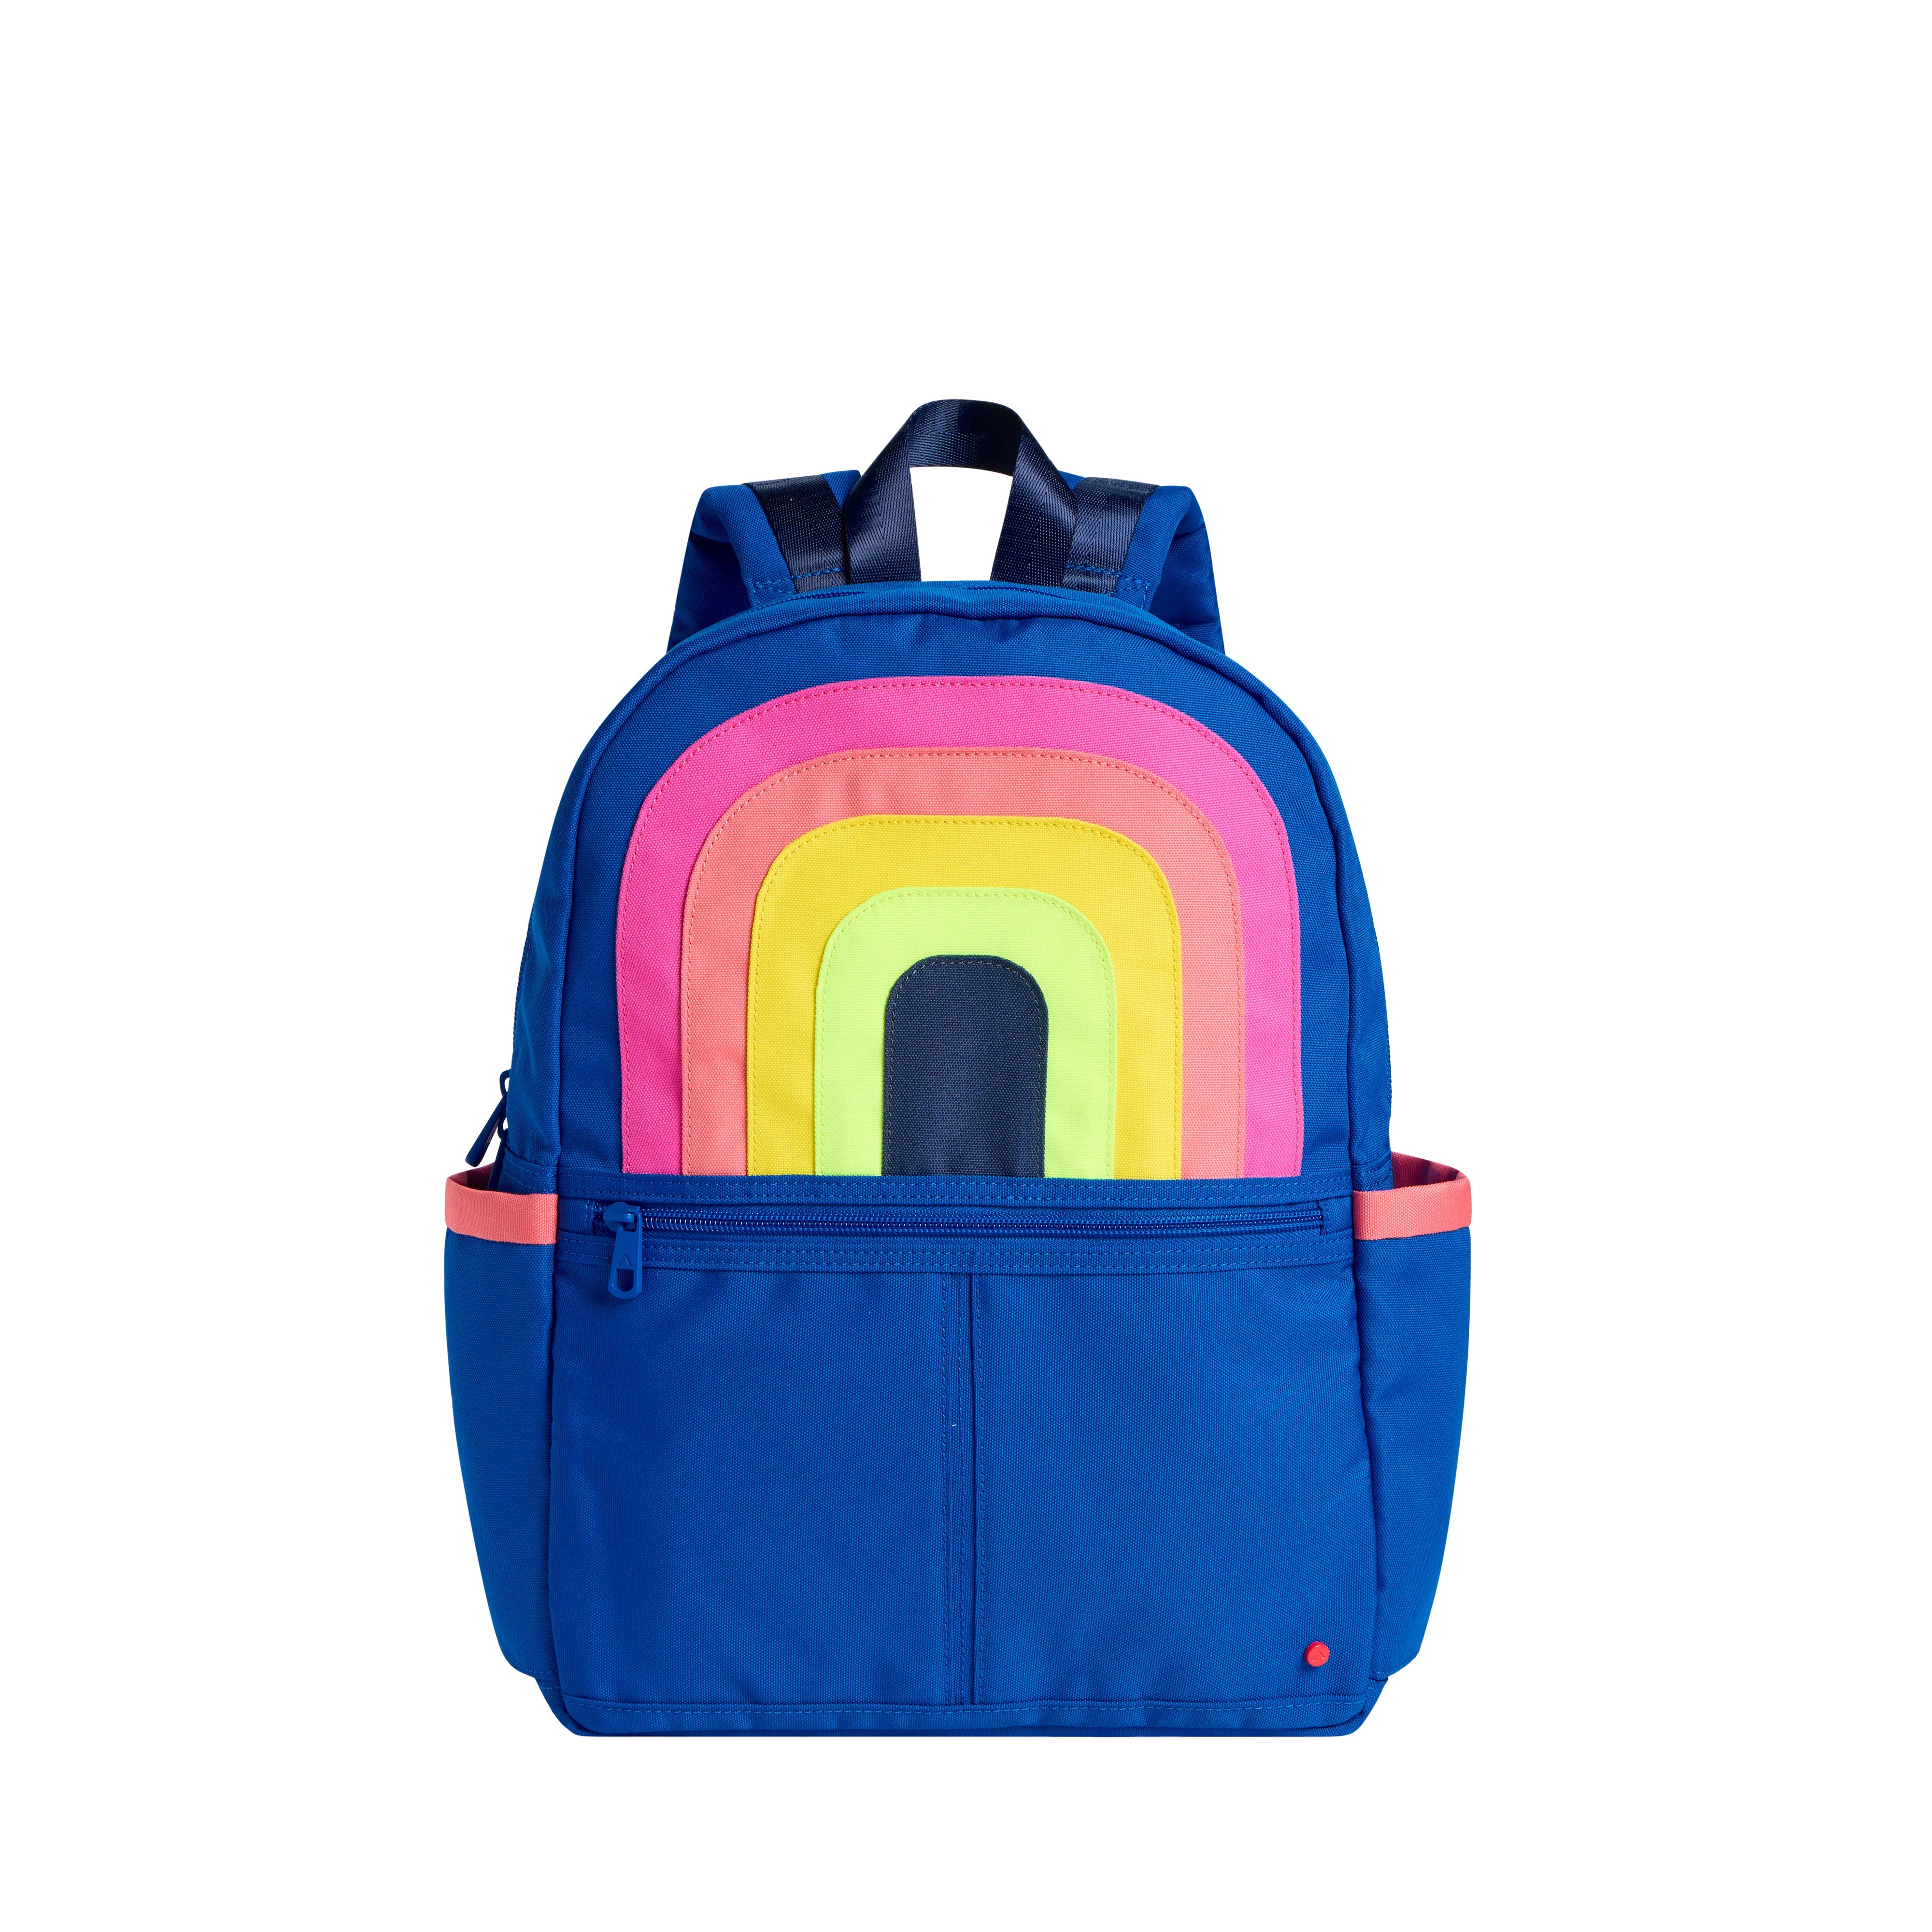 STATE Bags | Kane Kids Travel Backpack Polyester Canvas Rainbow | STATE Bags